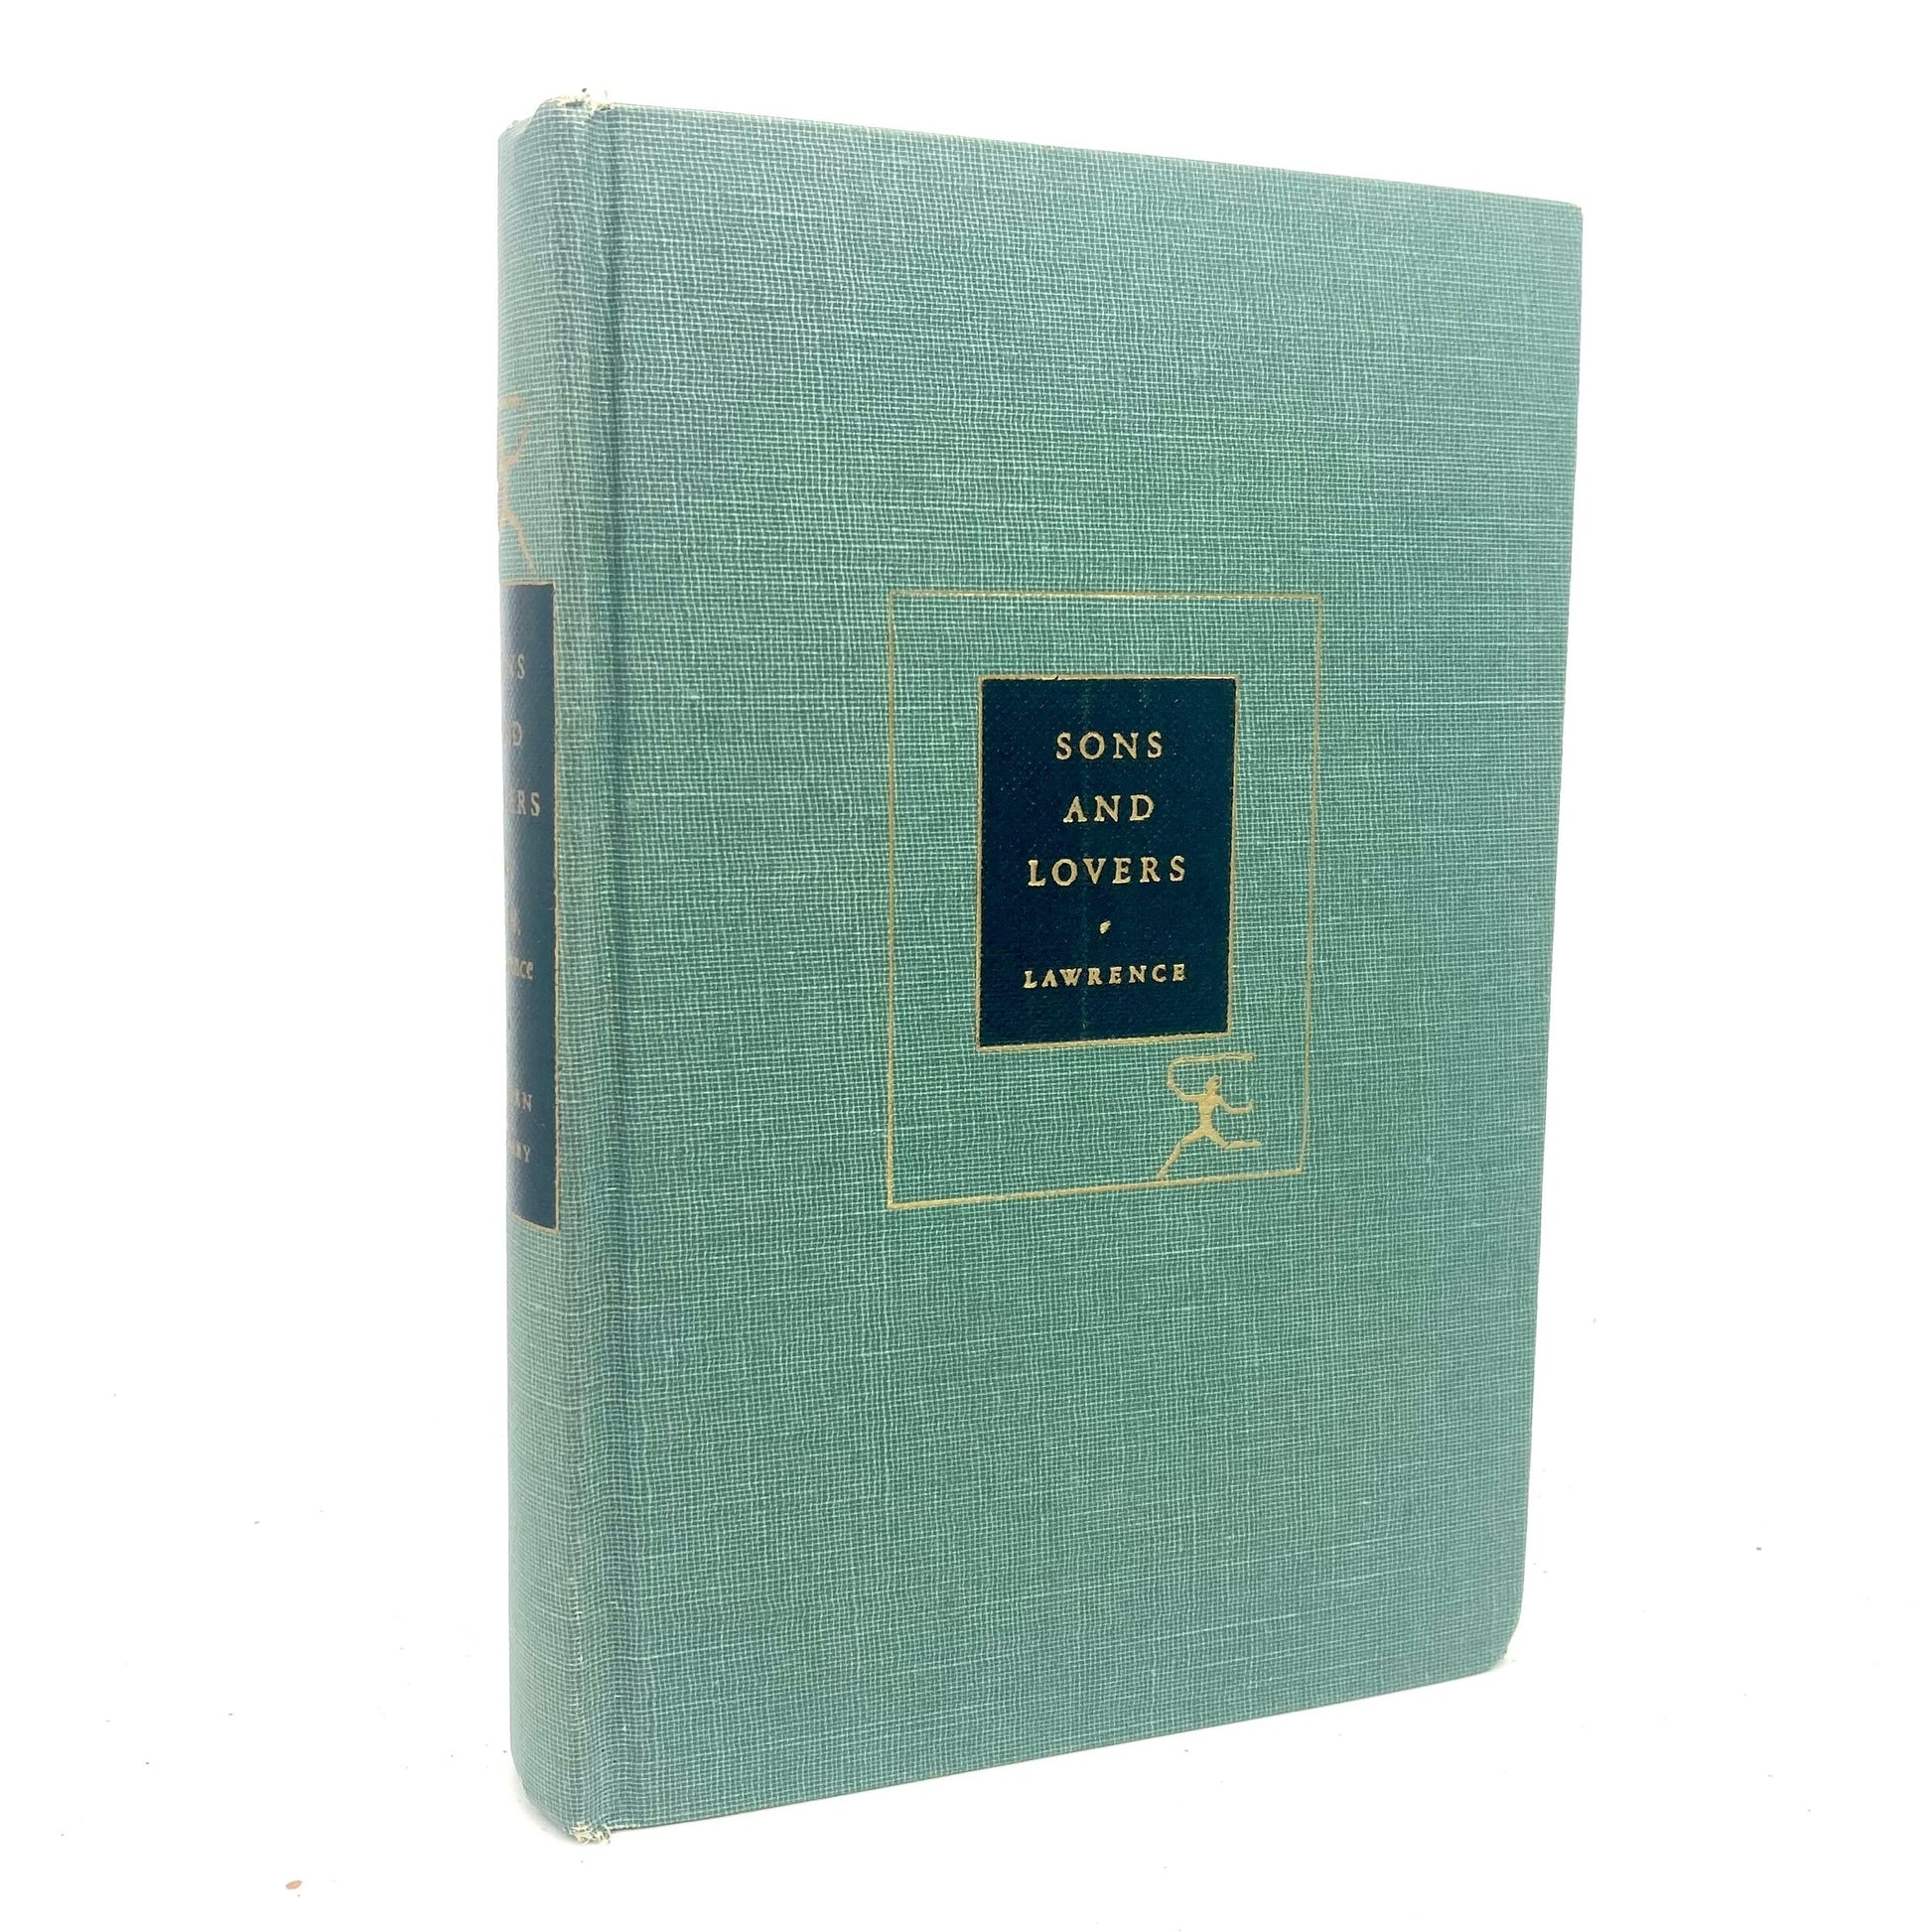 LAWRENCE, D.H. "Sons and Lovers" [Modern Library, 1922] - Buzz Bookstore